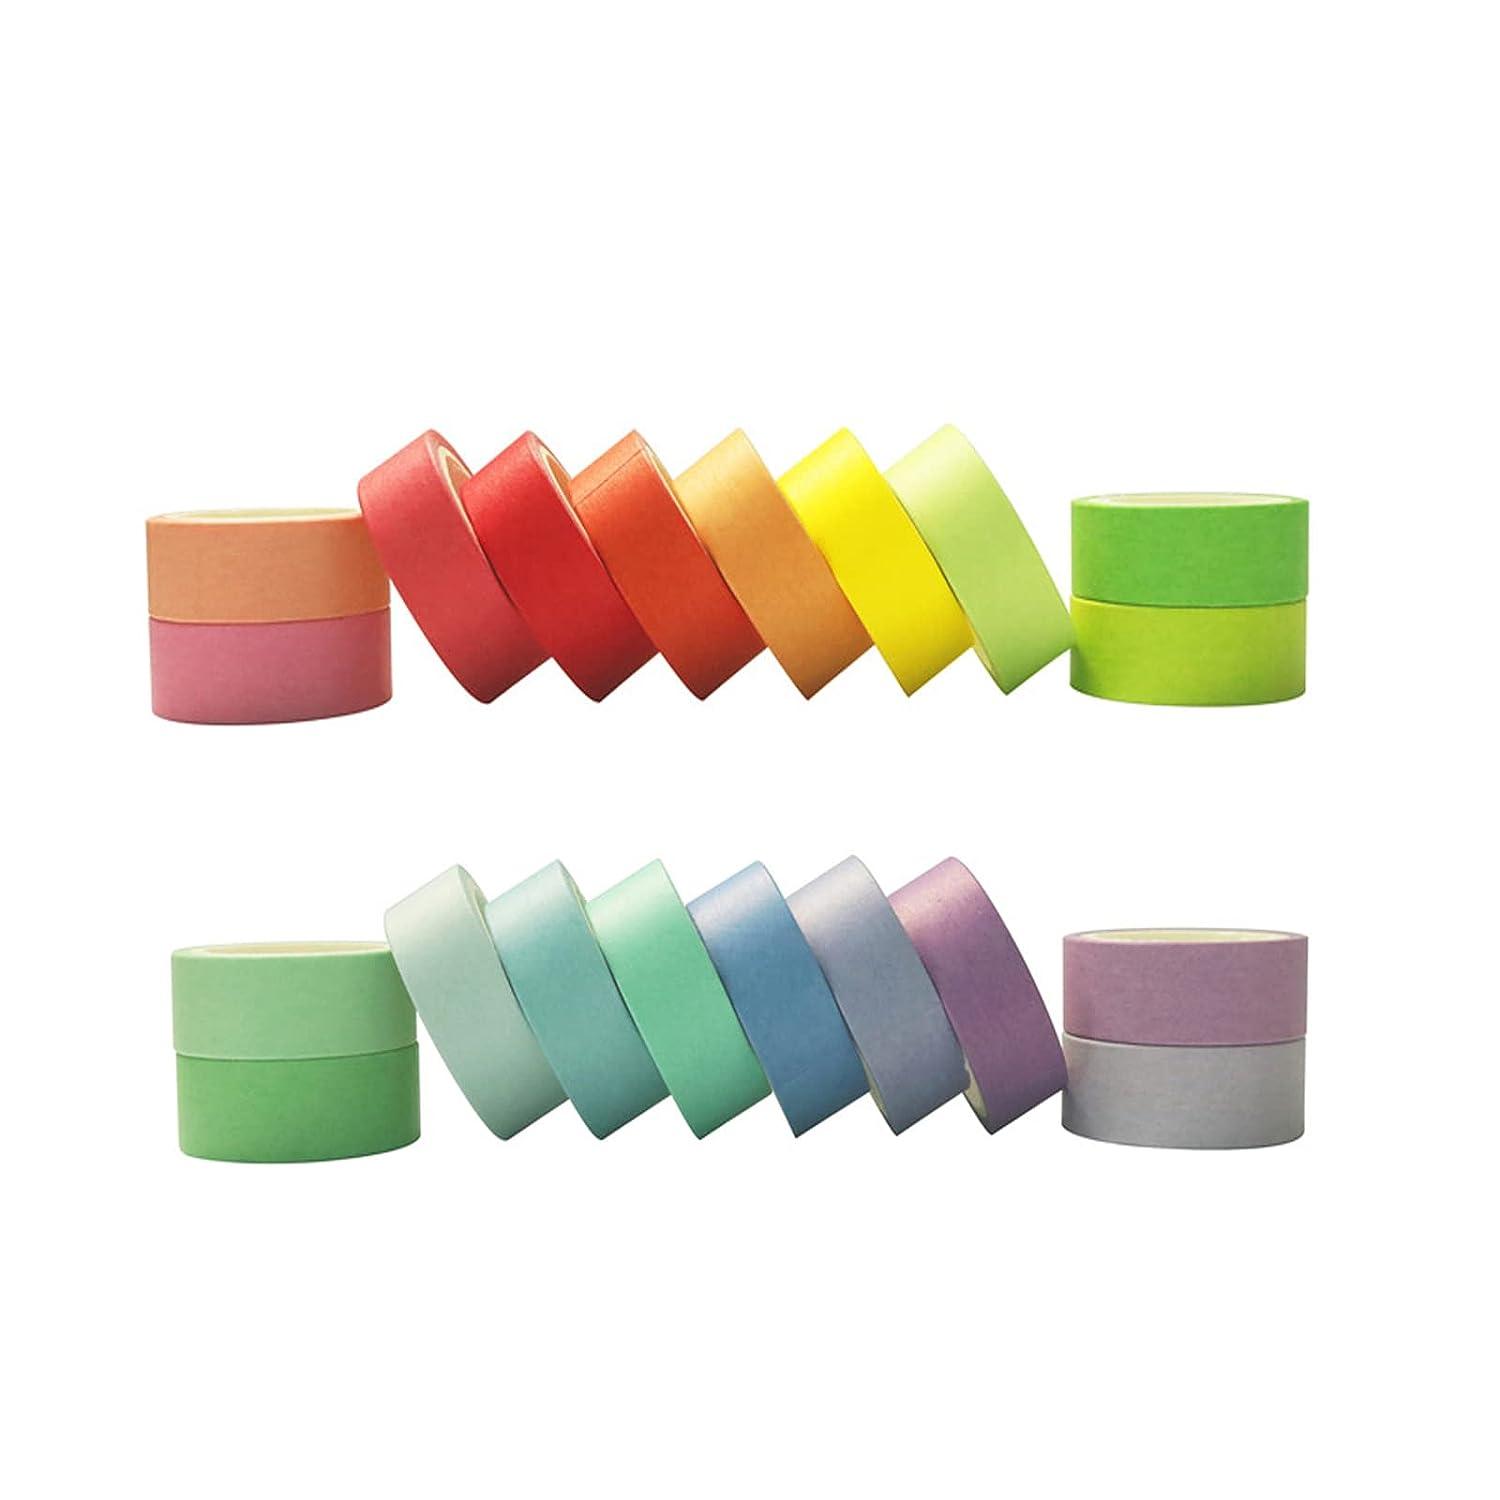 Colorful Masking Tape Colored Tape Craft Tape DIY Decorative